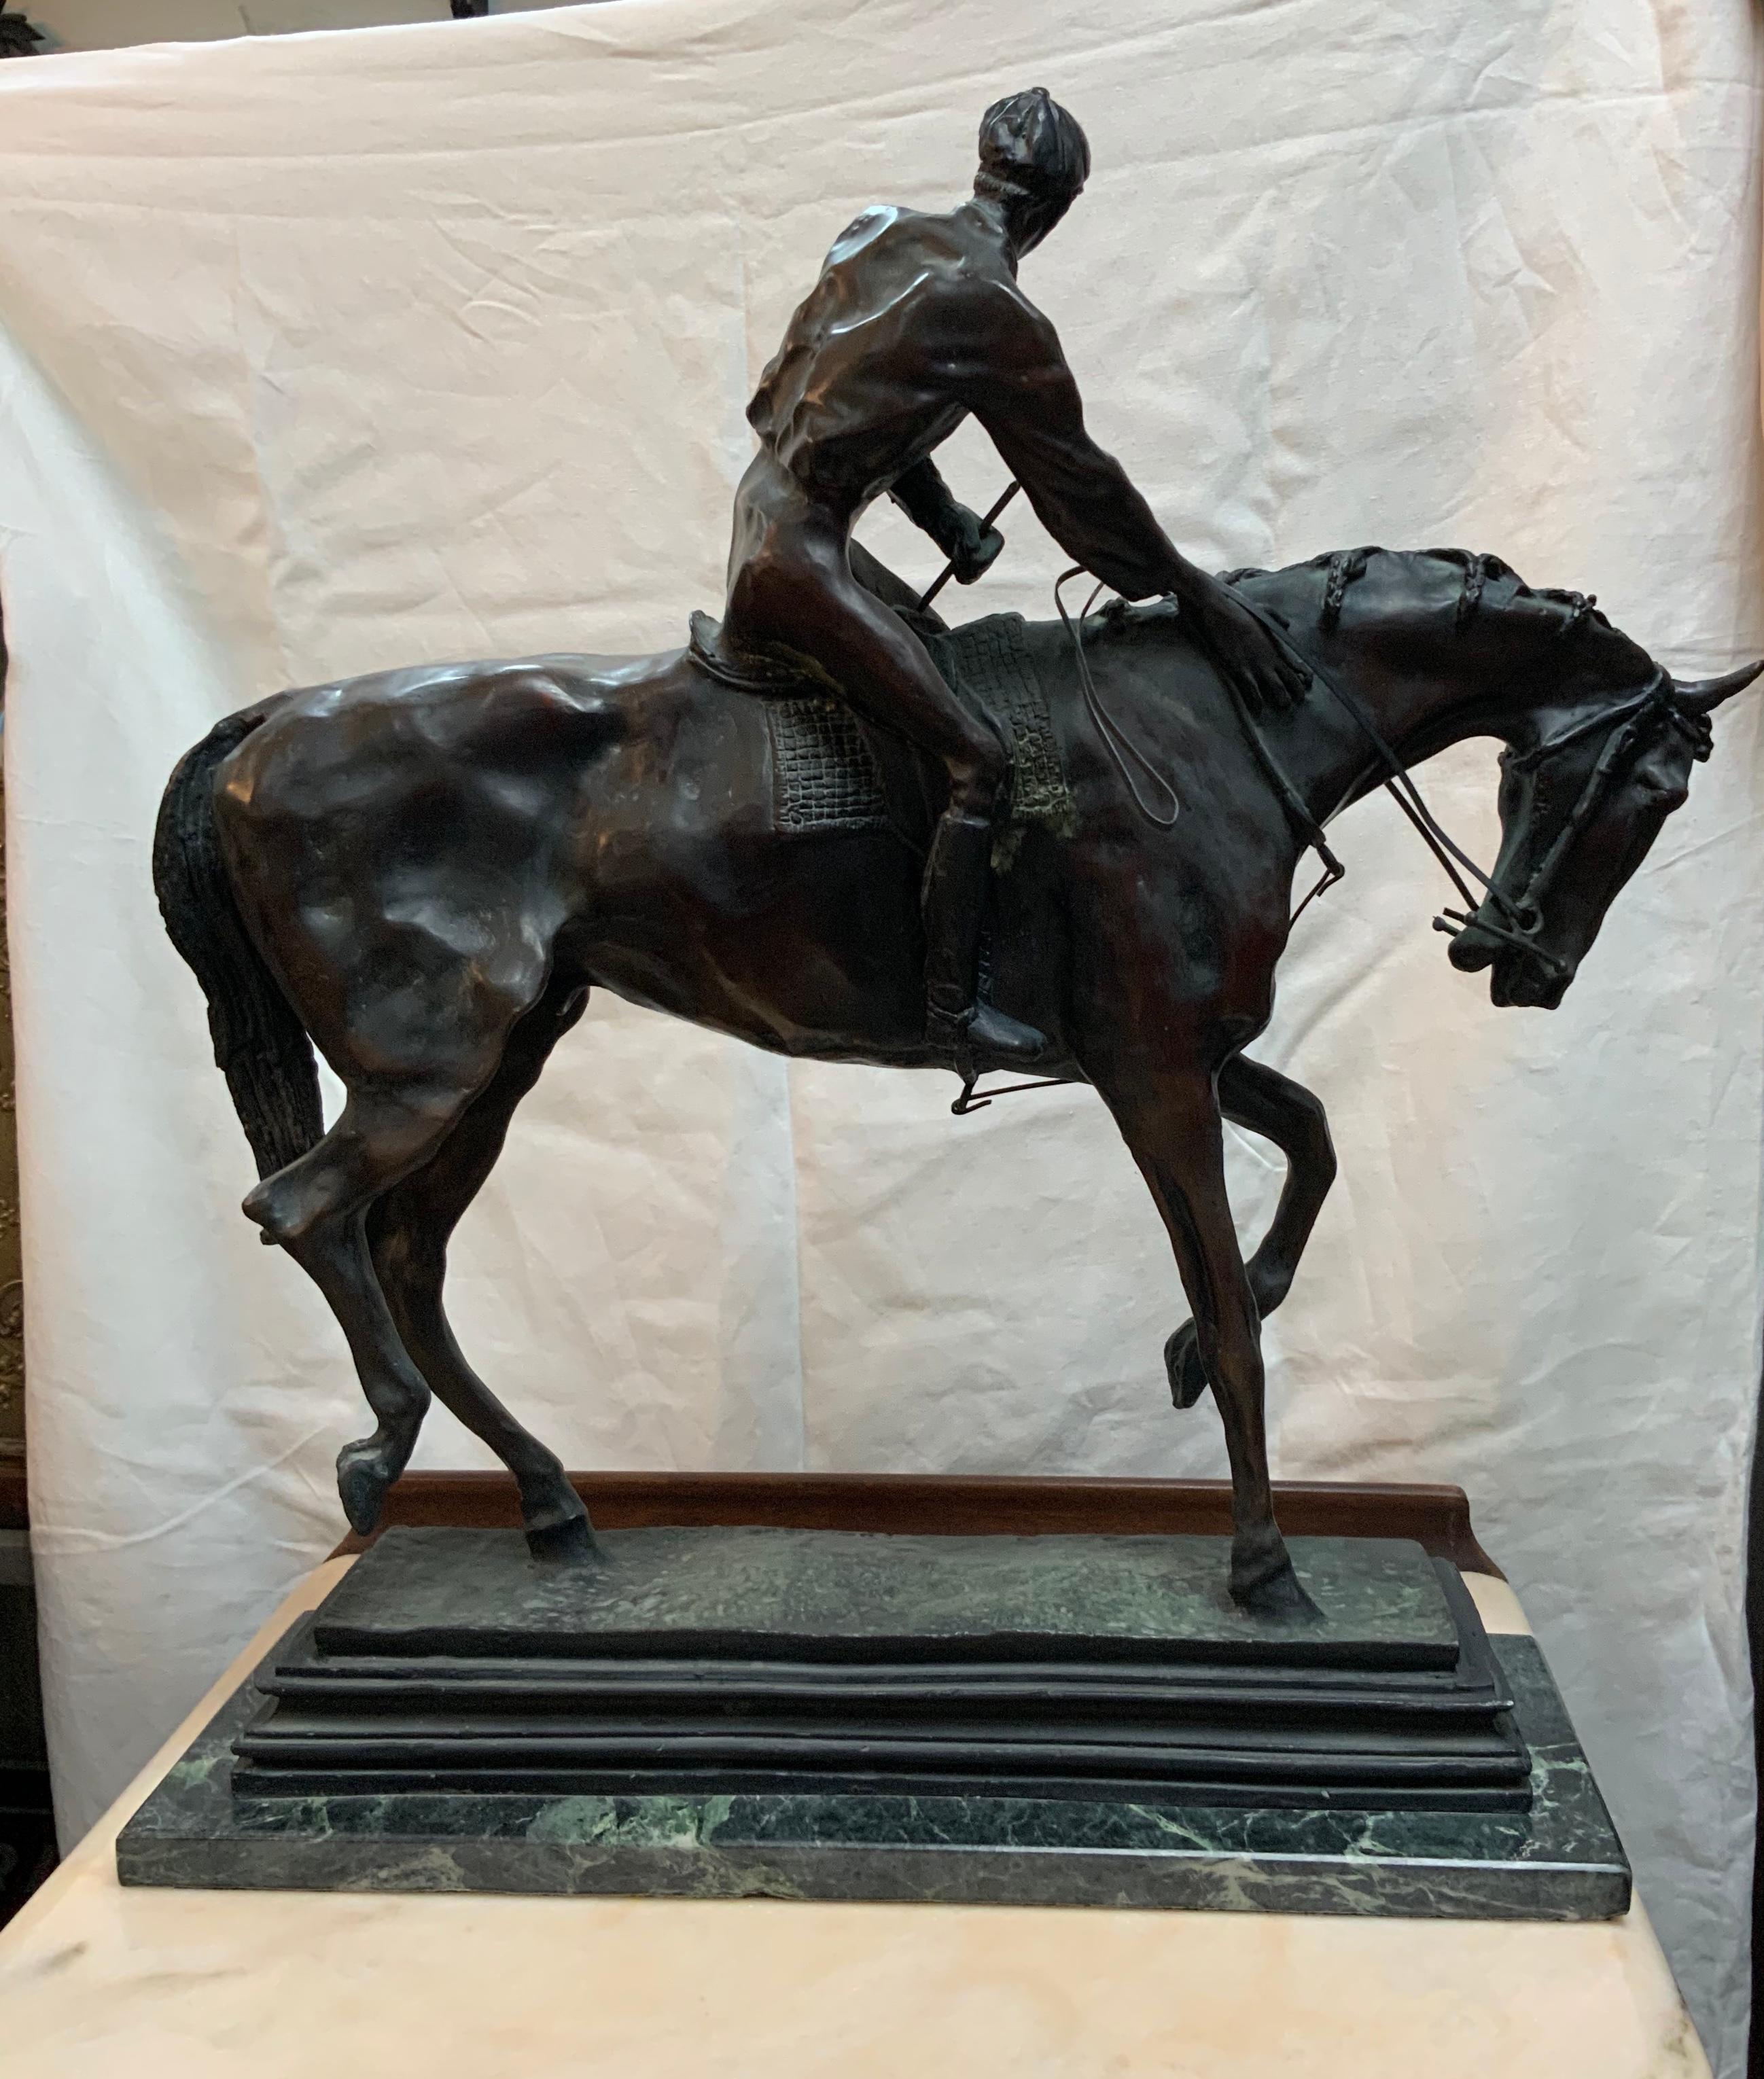 This is a patinated sculpture of a jockey and his horse by French sculptor Isidore Jules Bonheur. He is considered one of the great animal’s sculptors of the 19th century. The sculpture depicts in detail a jockey who is calming and probably